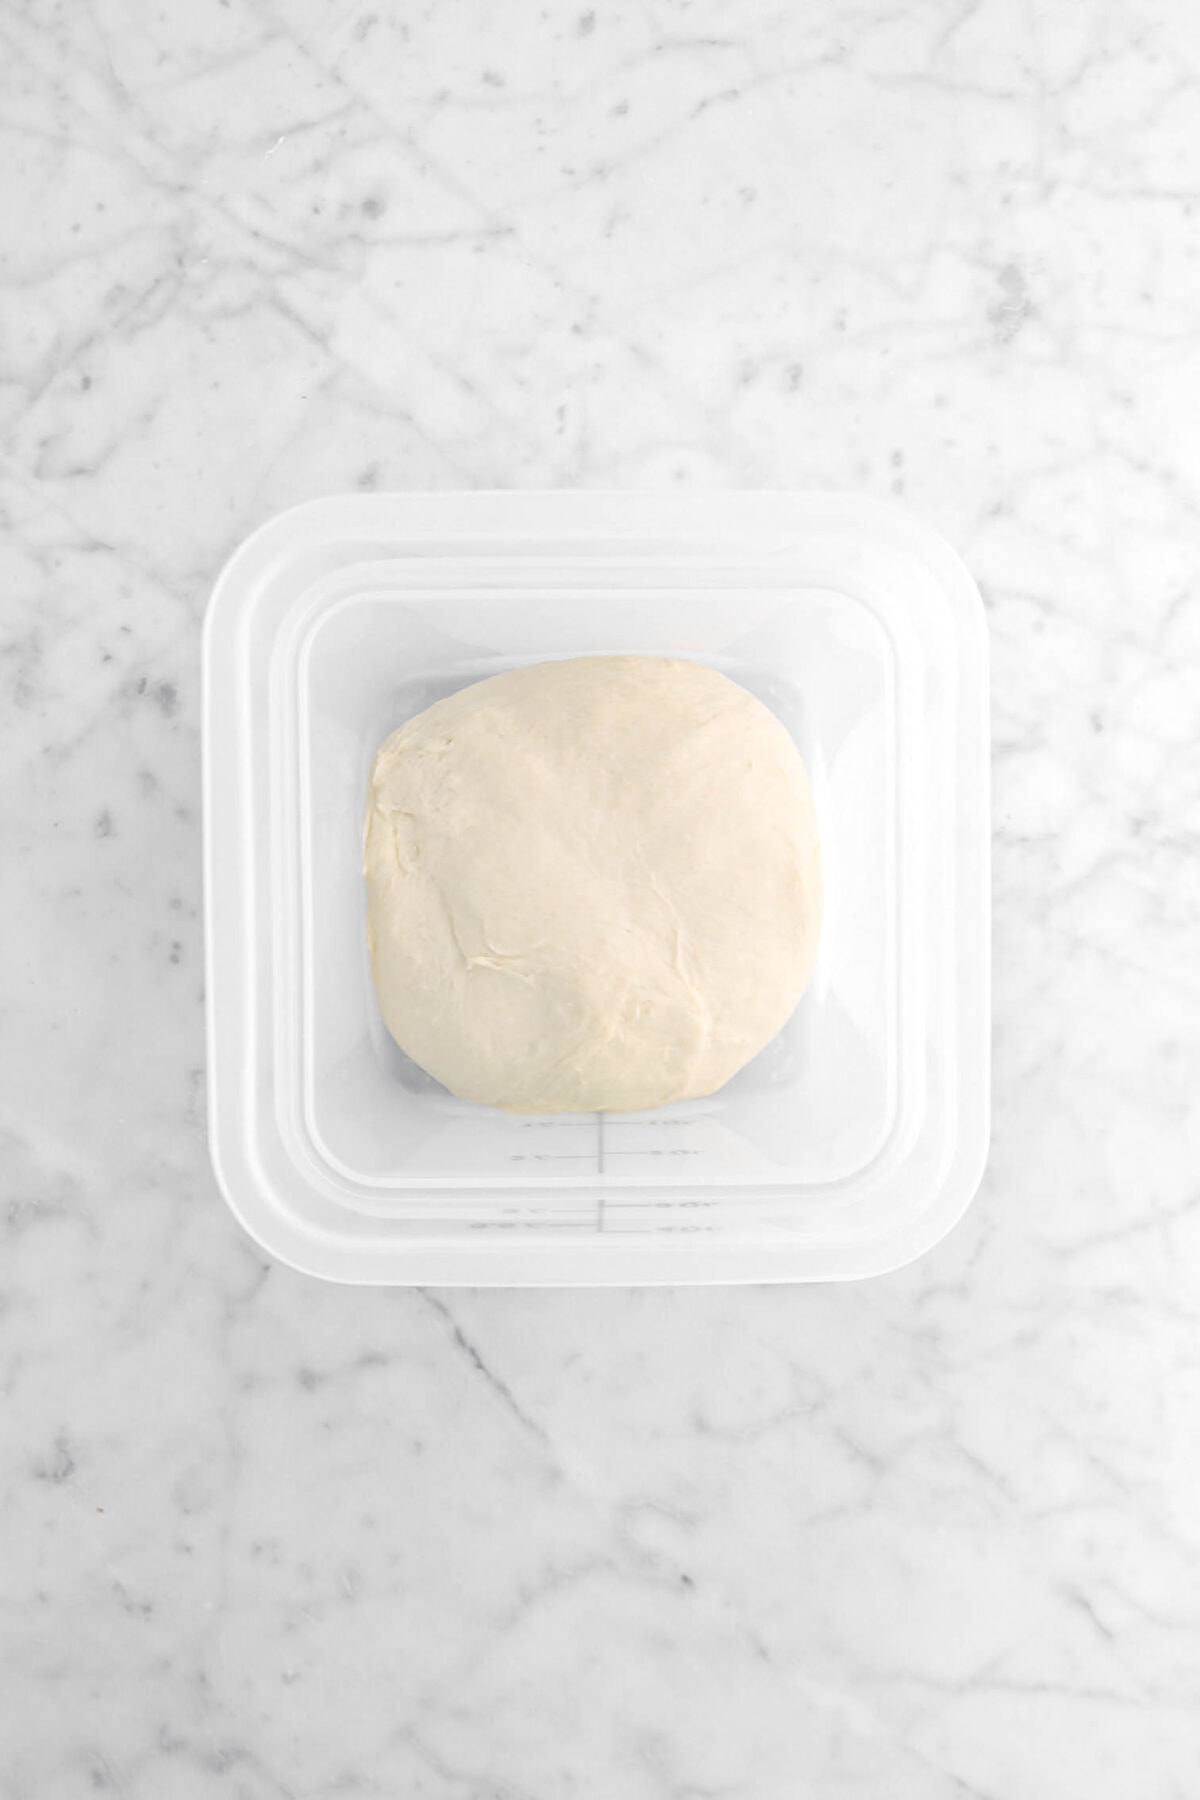 dough in plastic container on marble surface